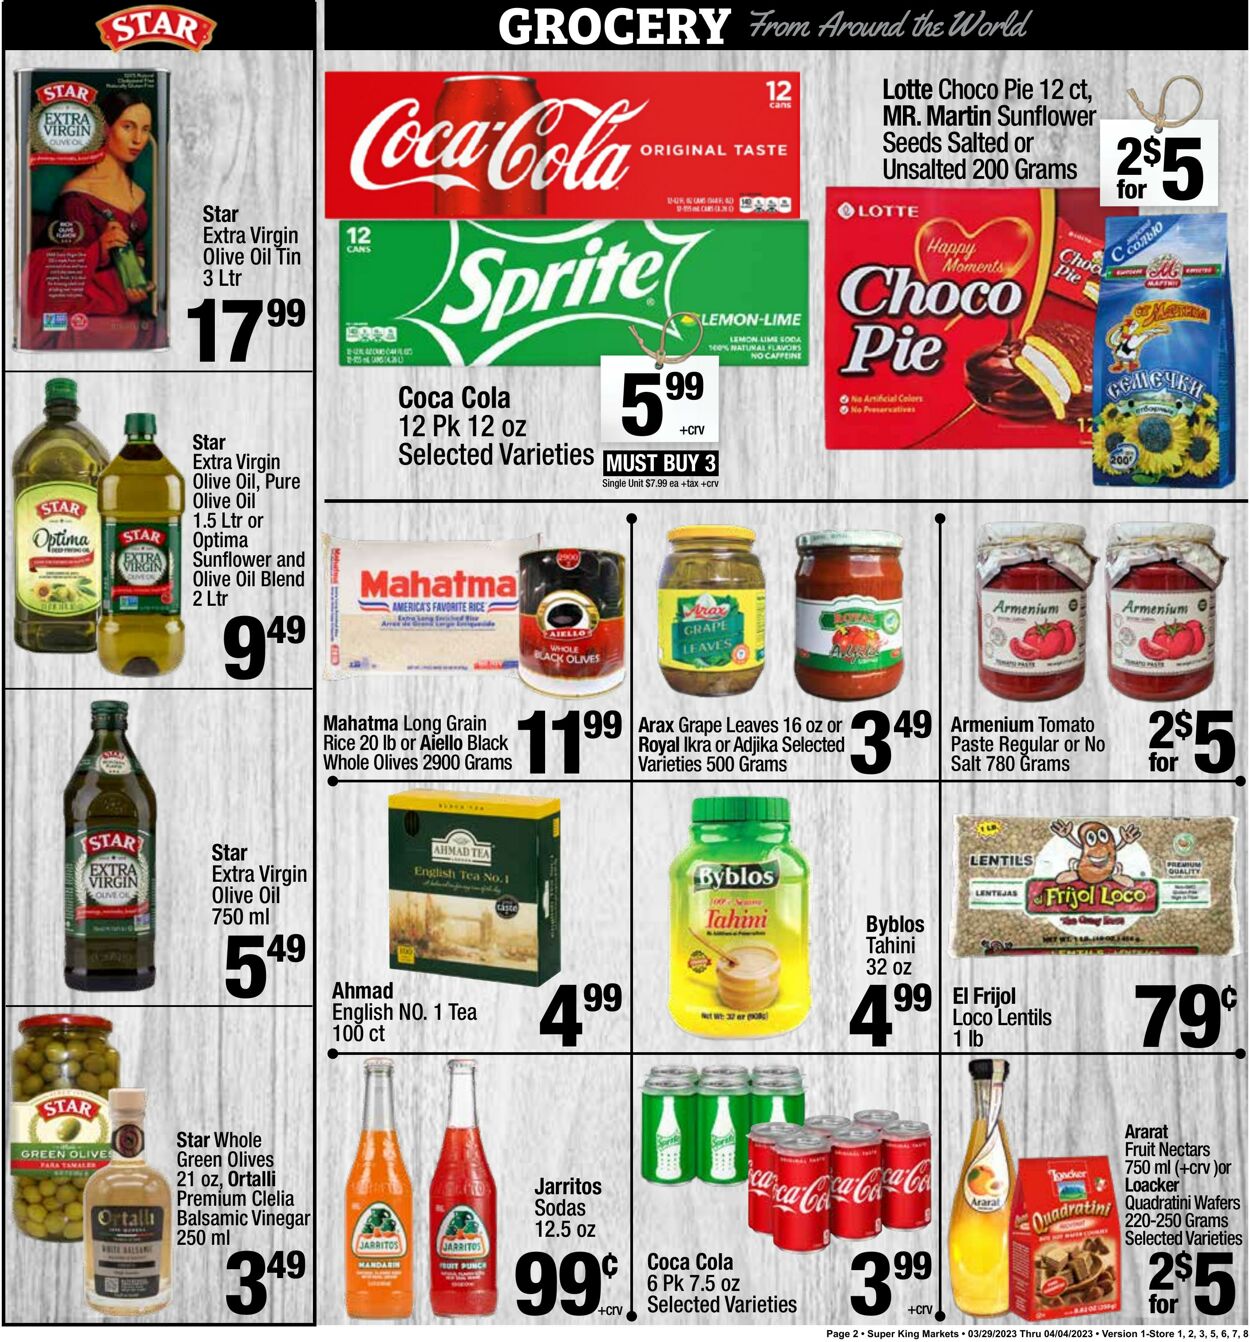 Weekly ad Super King Markets 03/29/2023 - 04/04/2023